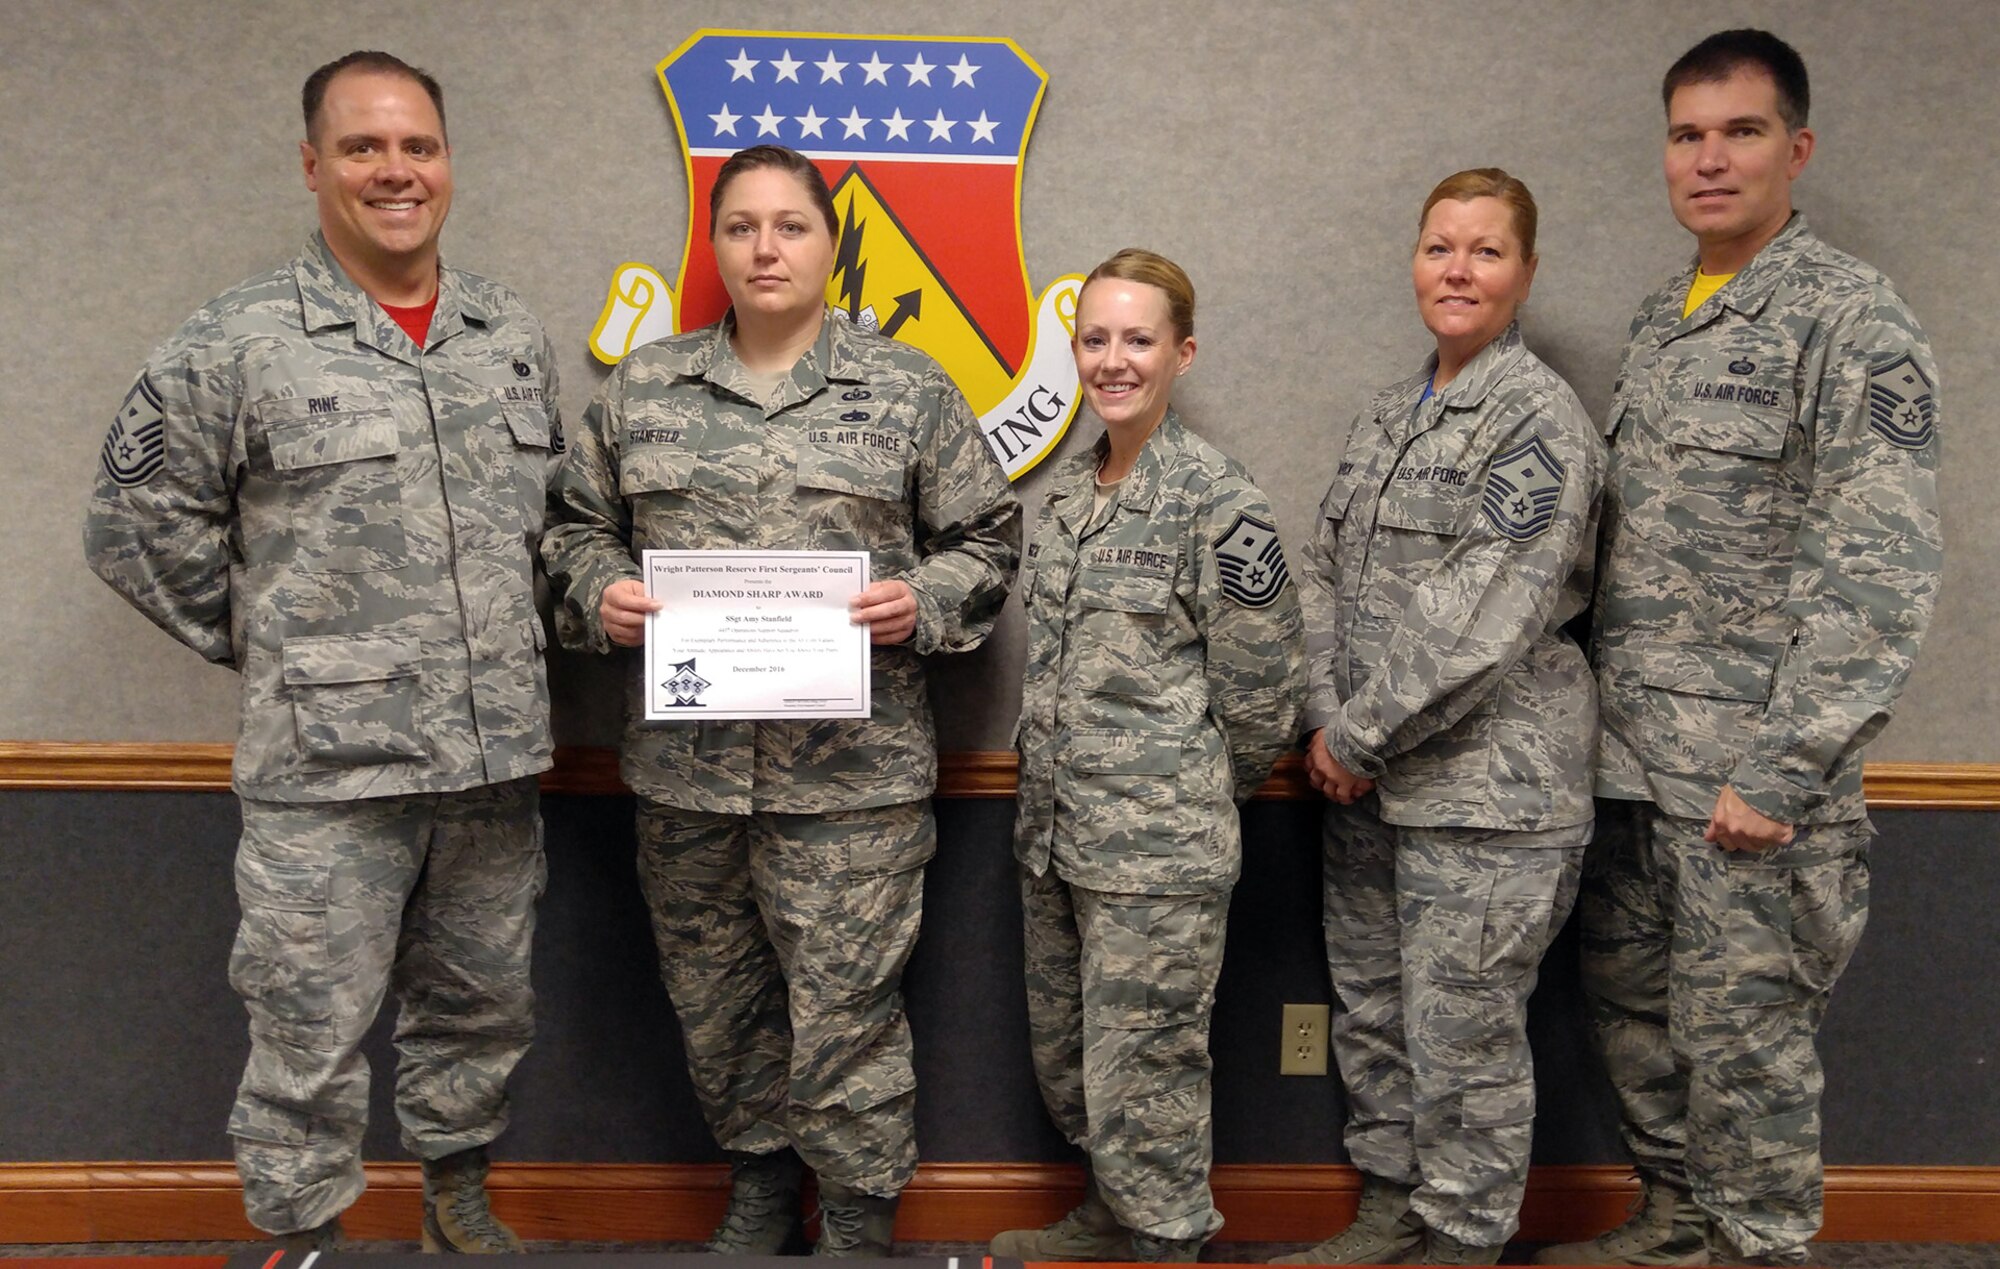 Staff Sgt. Amy Stanfield, 445th Operations Support Squadron, is presented the December 2016 Diamond Sharp award by Jan. 21, 2017. 445th Airlift Wing first sergeants Senior Master Sgt. Eric Rine, 445th Aerospace Medicine Squadron, Master Sgt. Sierra Cabungcal, 445th OSS, Senior Master Sgt. Glenda Marck, 89th Airlift Squadron, and Master Sgt. David Reagan, 445th Aeromedical Evacuation Squadron, presented her with the award for exemplary performance and adherence to the Air Force Core Values, attitude and appearance. (Courtesy photo) 